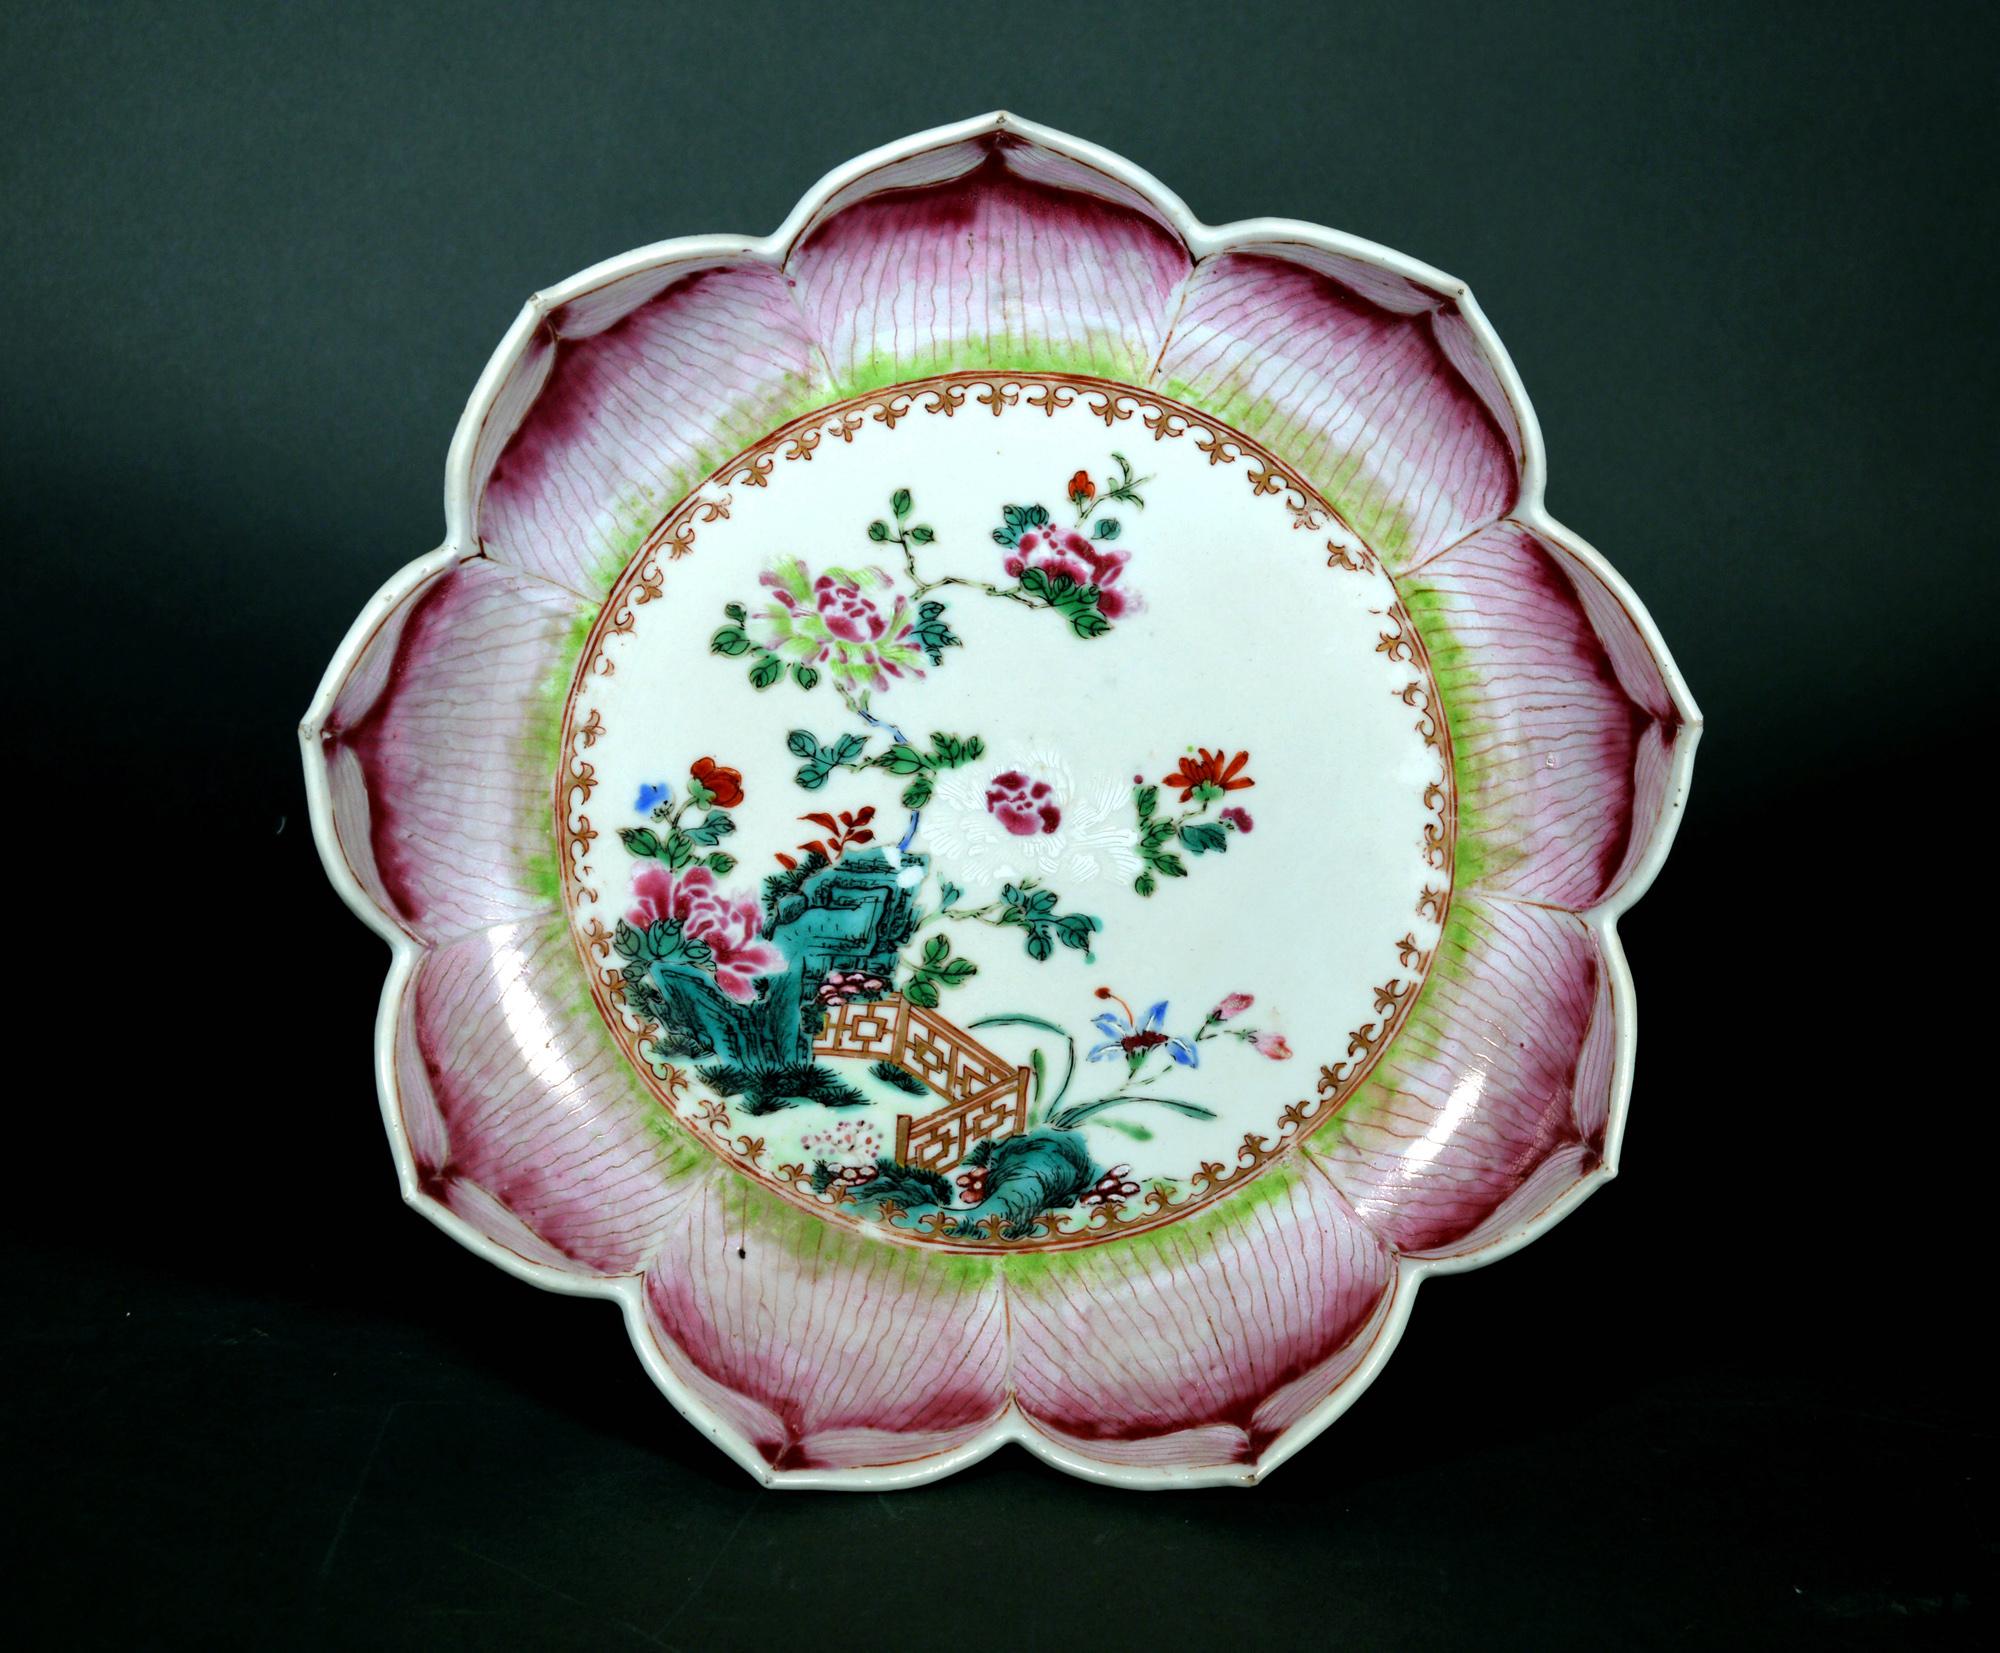 Chinese Export Porcelain Lotus Leaf Shaped Dish,
Circa 1765

The large Chinese Export “famille rose” porcelain saucer dish is made in the form of a lotus leaf with the rim and border in the form of nine different lotus leaf petals in shades of pink